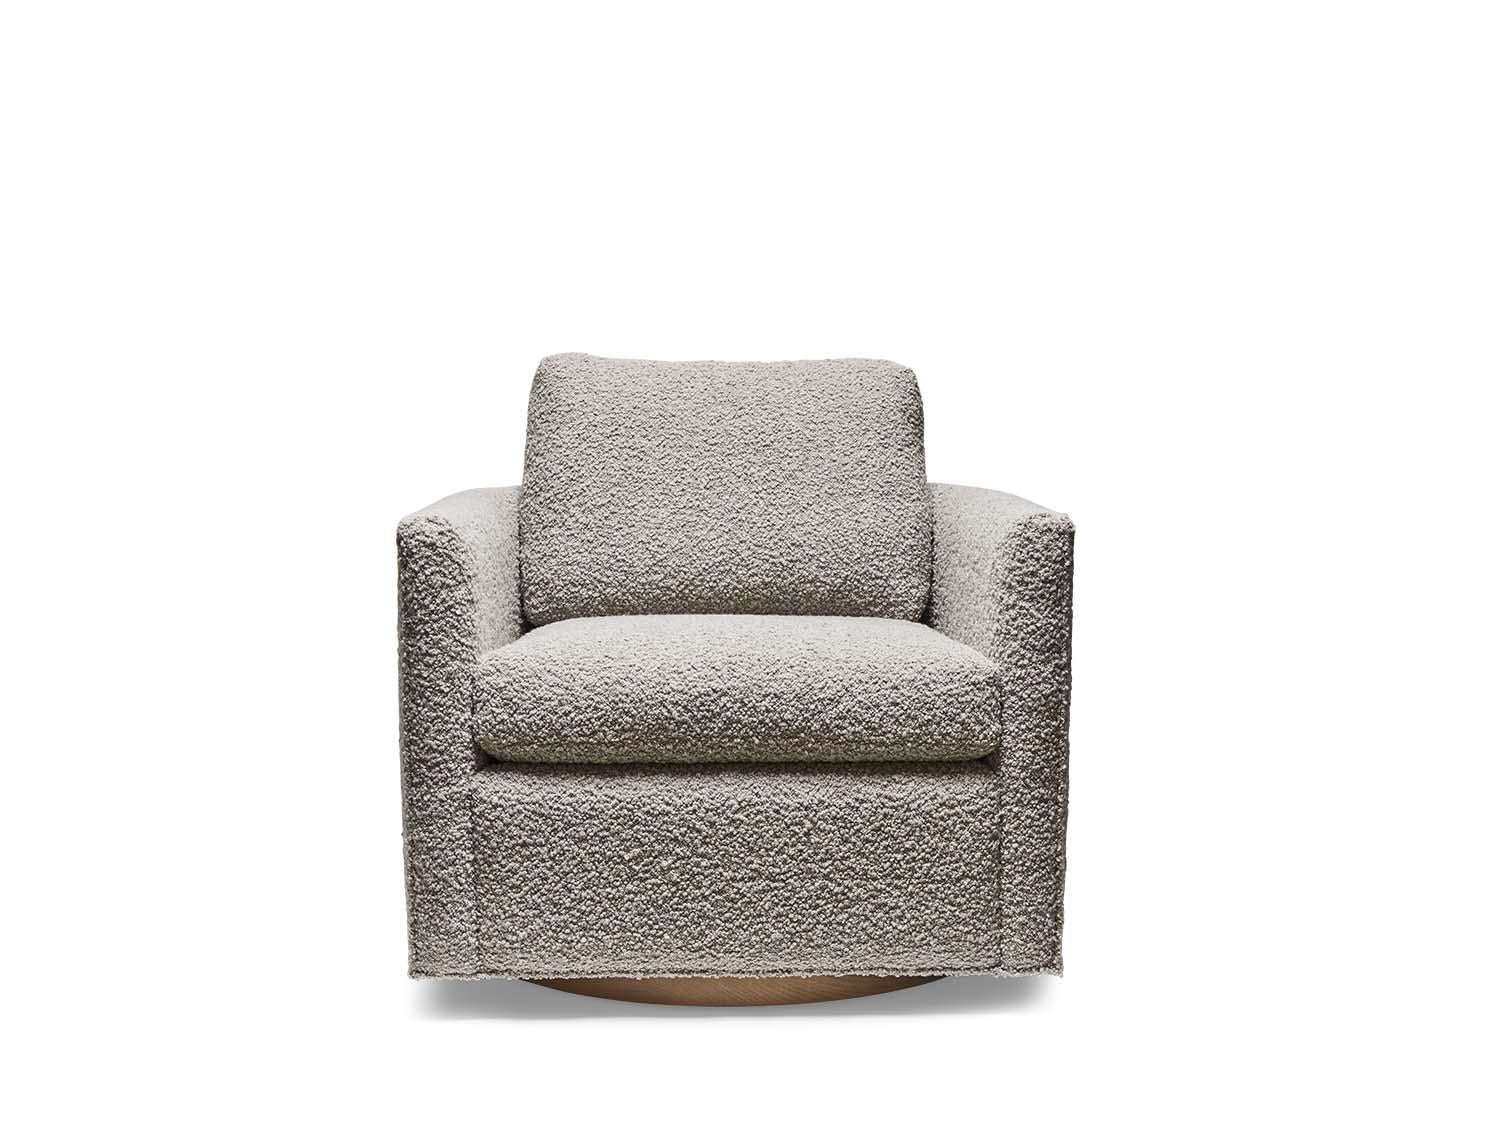 The curved back swivel chair is a tuxedo style lounge chair with curved corners and a metal base. The chair features down-wrapped, removable seat and back cushions.

The Lawson-Fenning Collection is designed and handmade in Los Angeles,